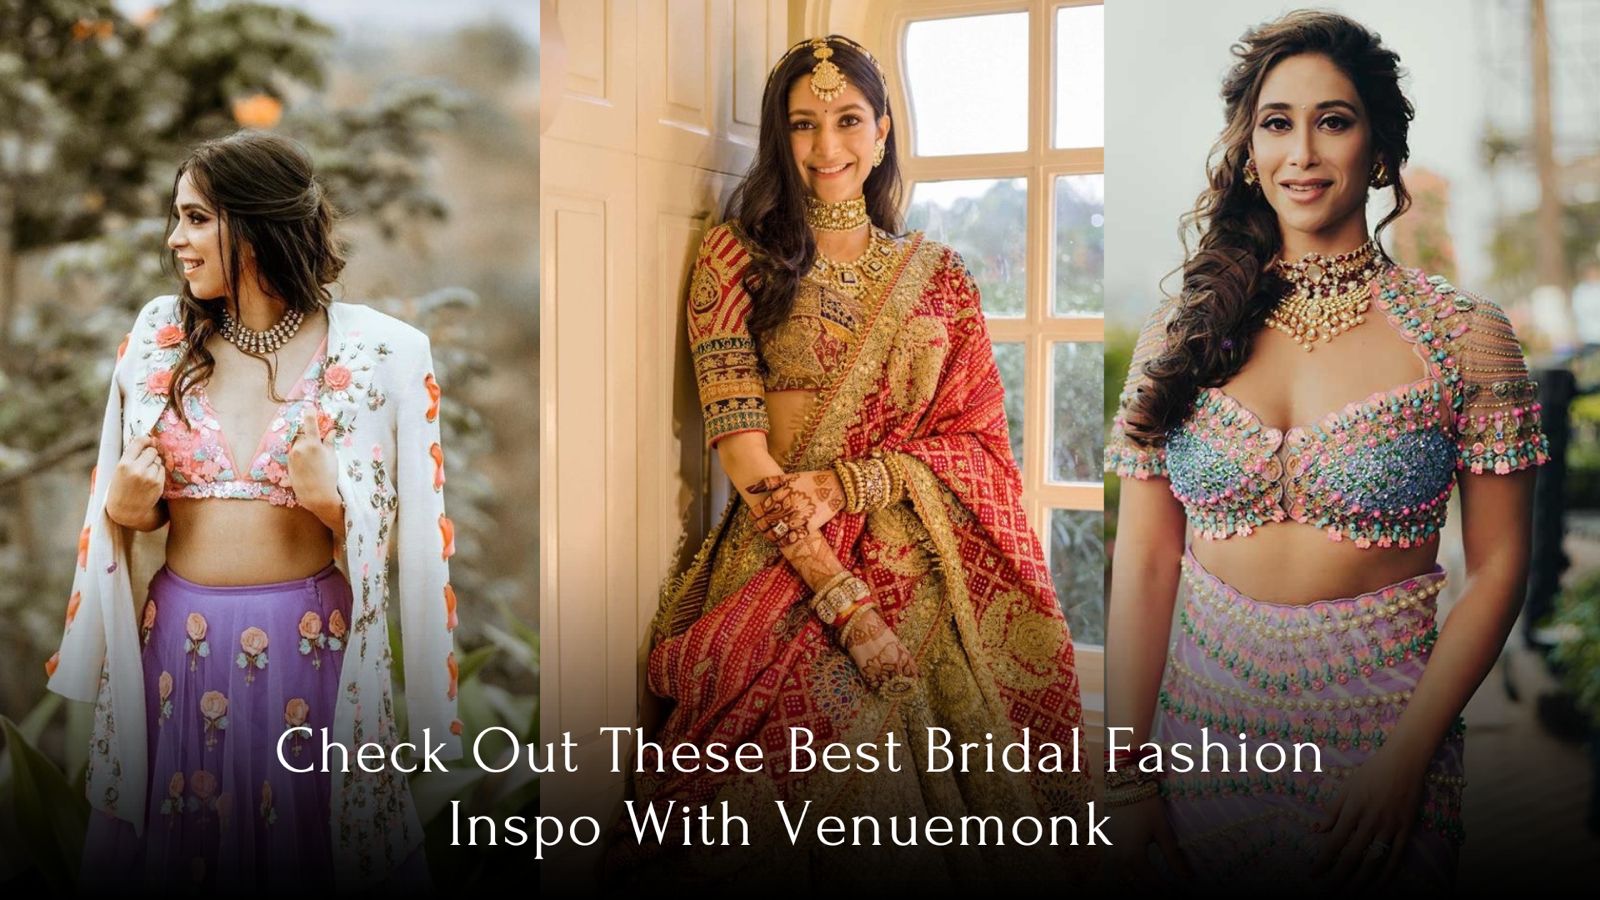 Check Out These Best Bridal Fashion Inspiration With Venuemonk!